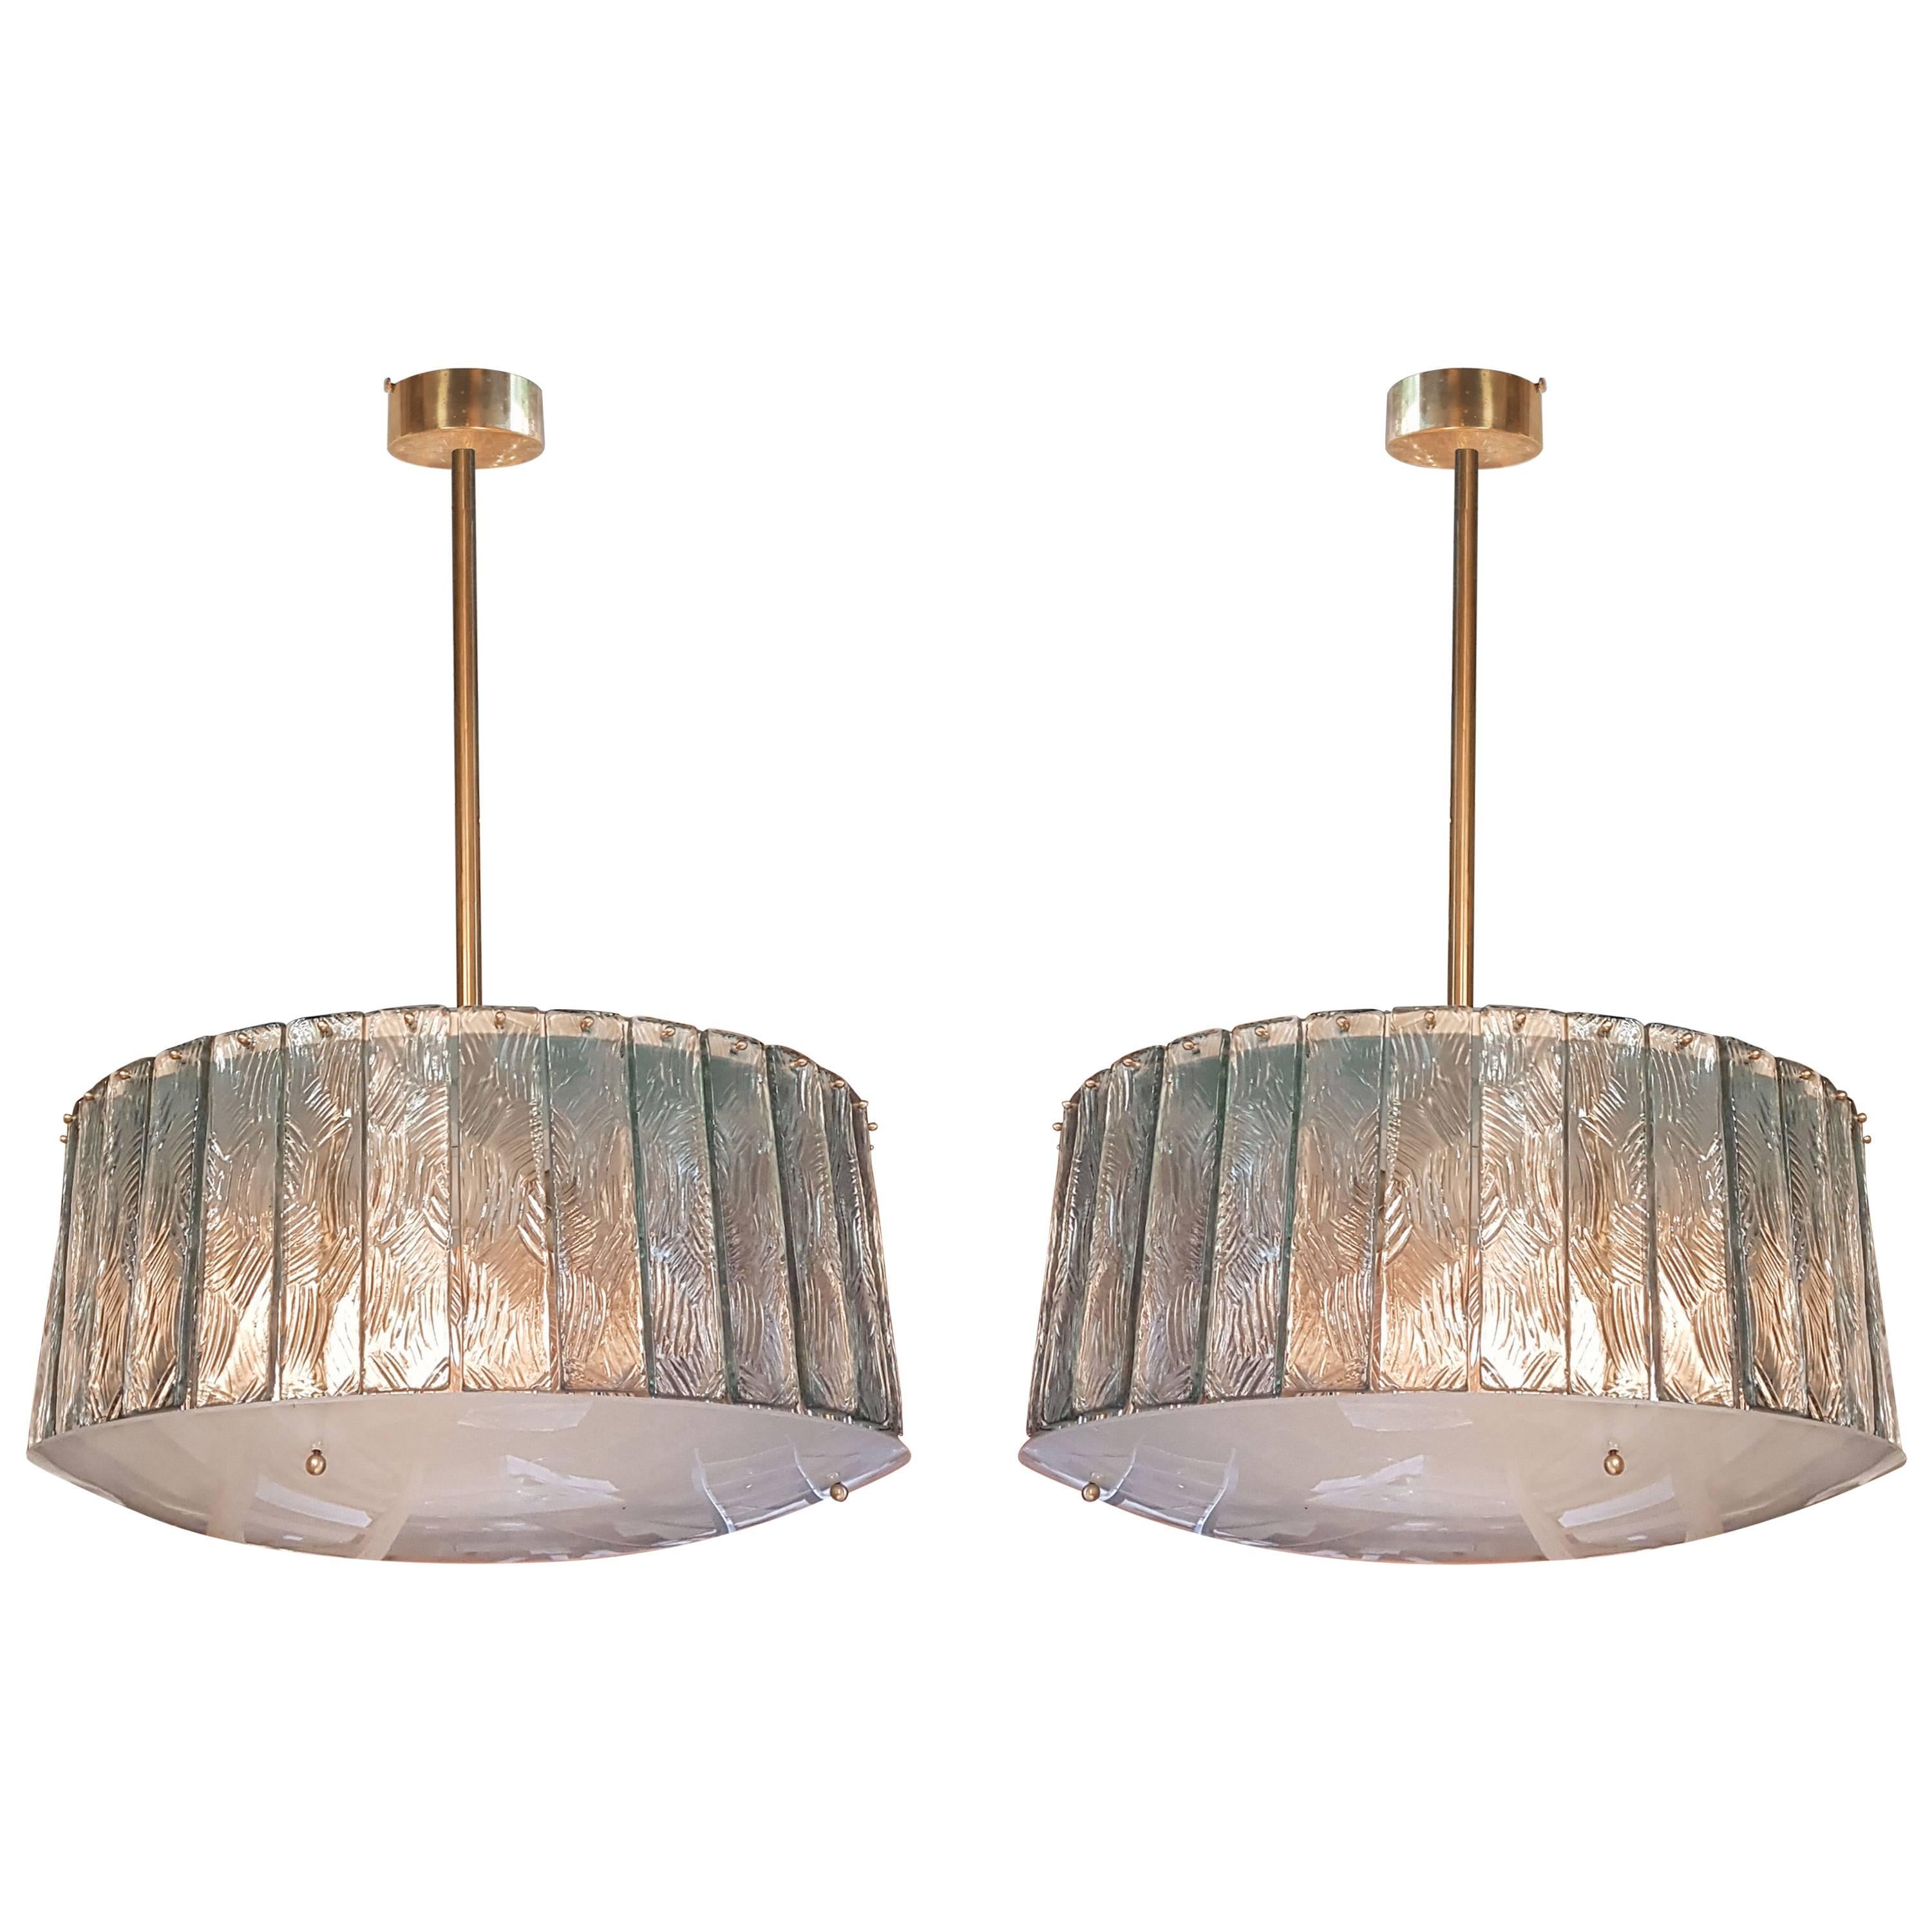 Pair of Midcentury Chandeliers by Fontana Arte in the Style of Gio Ponti